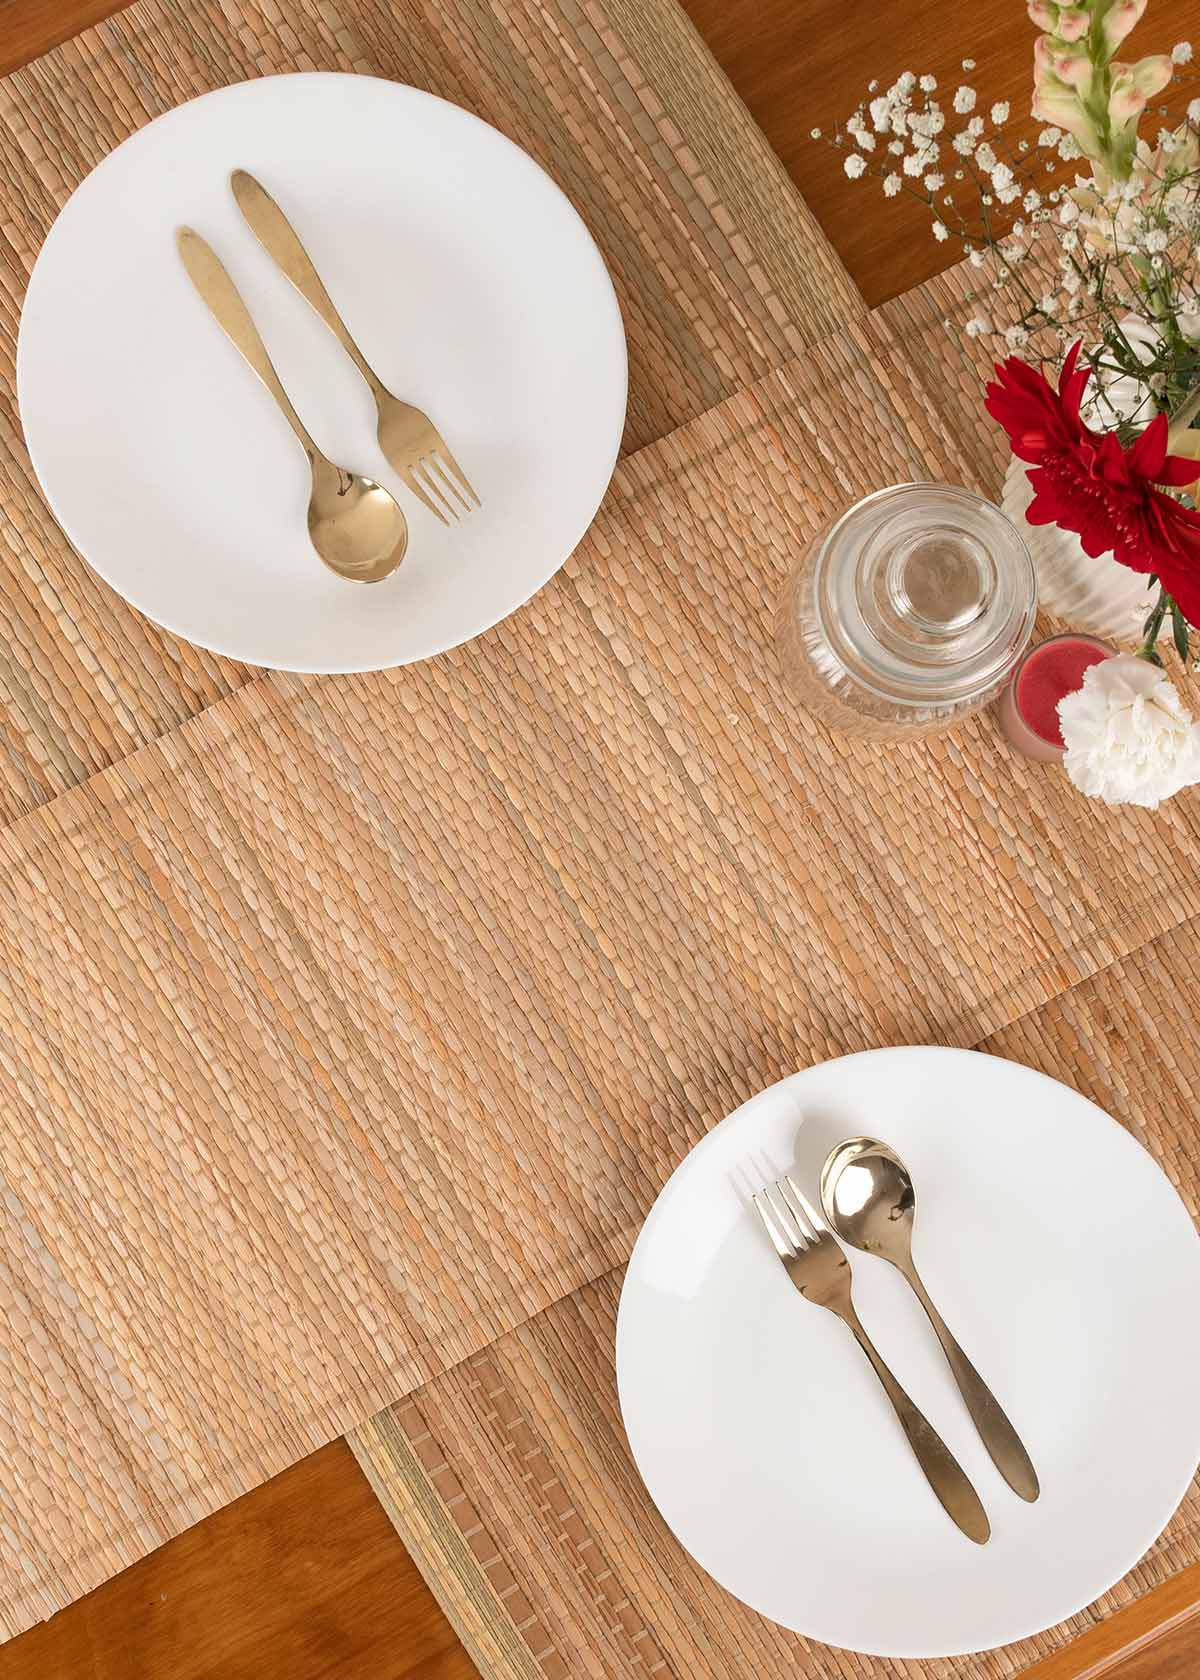 Woven grass 100% cotton Eco-friendly table runner for 4 seater or 6 seater Dining with tassels - Beige